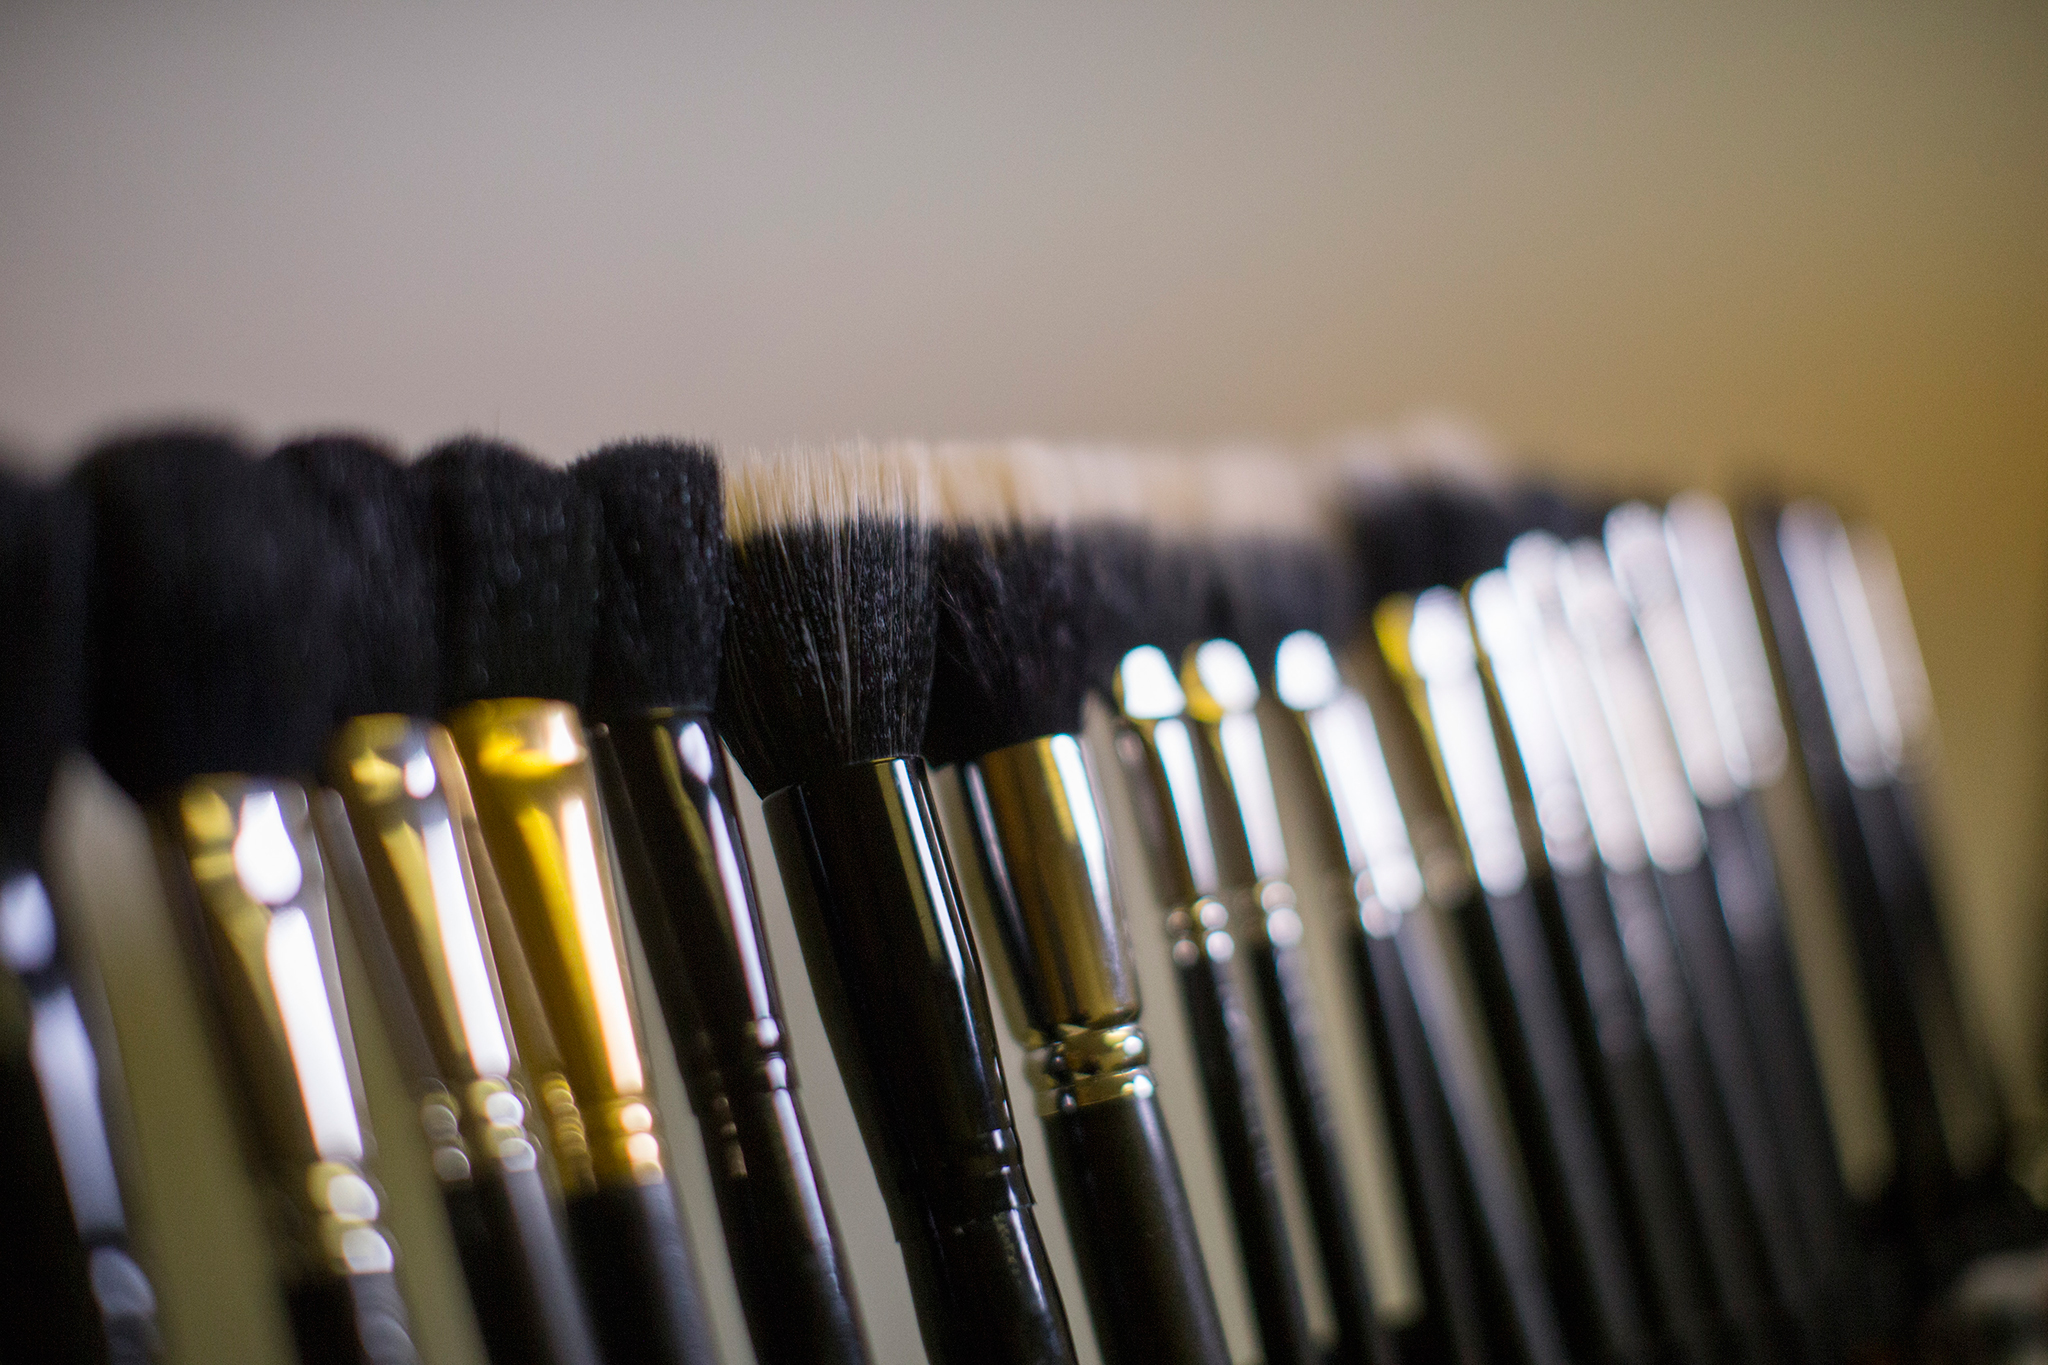 About The Makeup School By Sarah Rillon